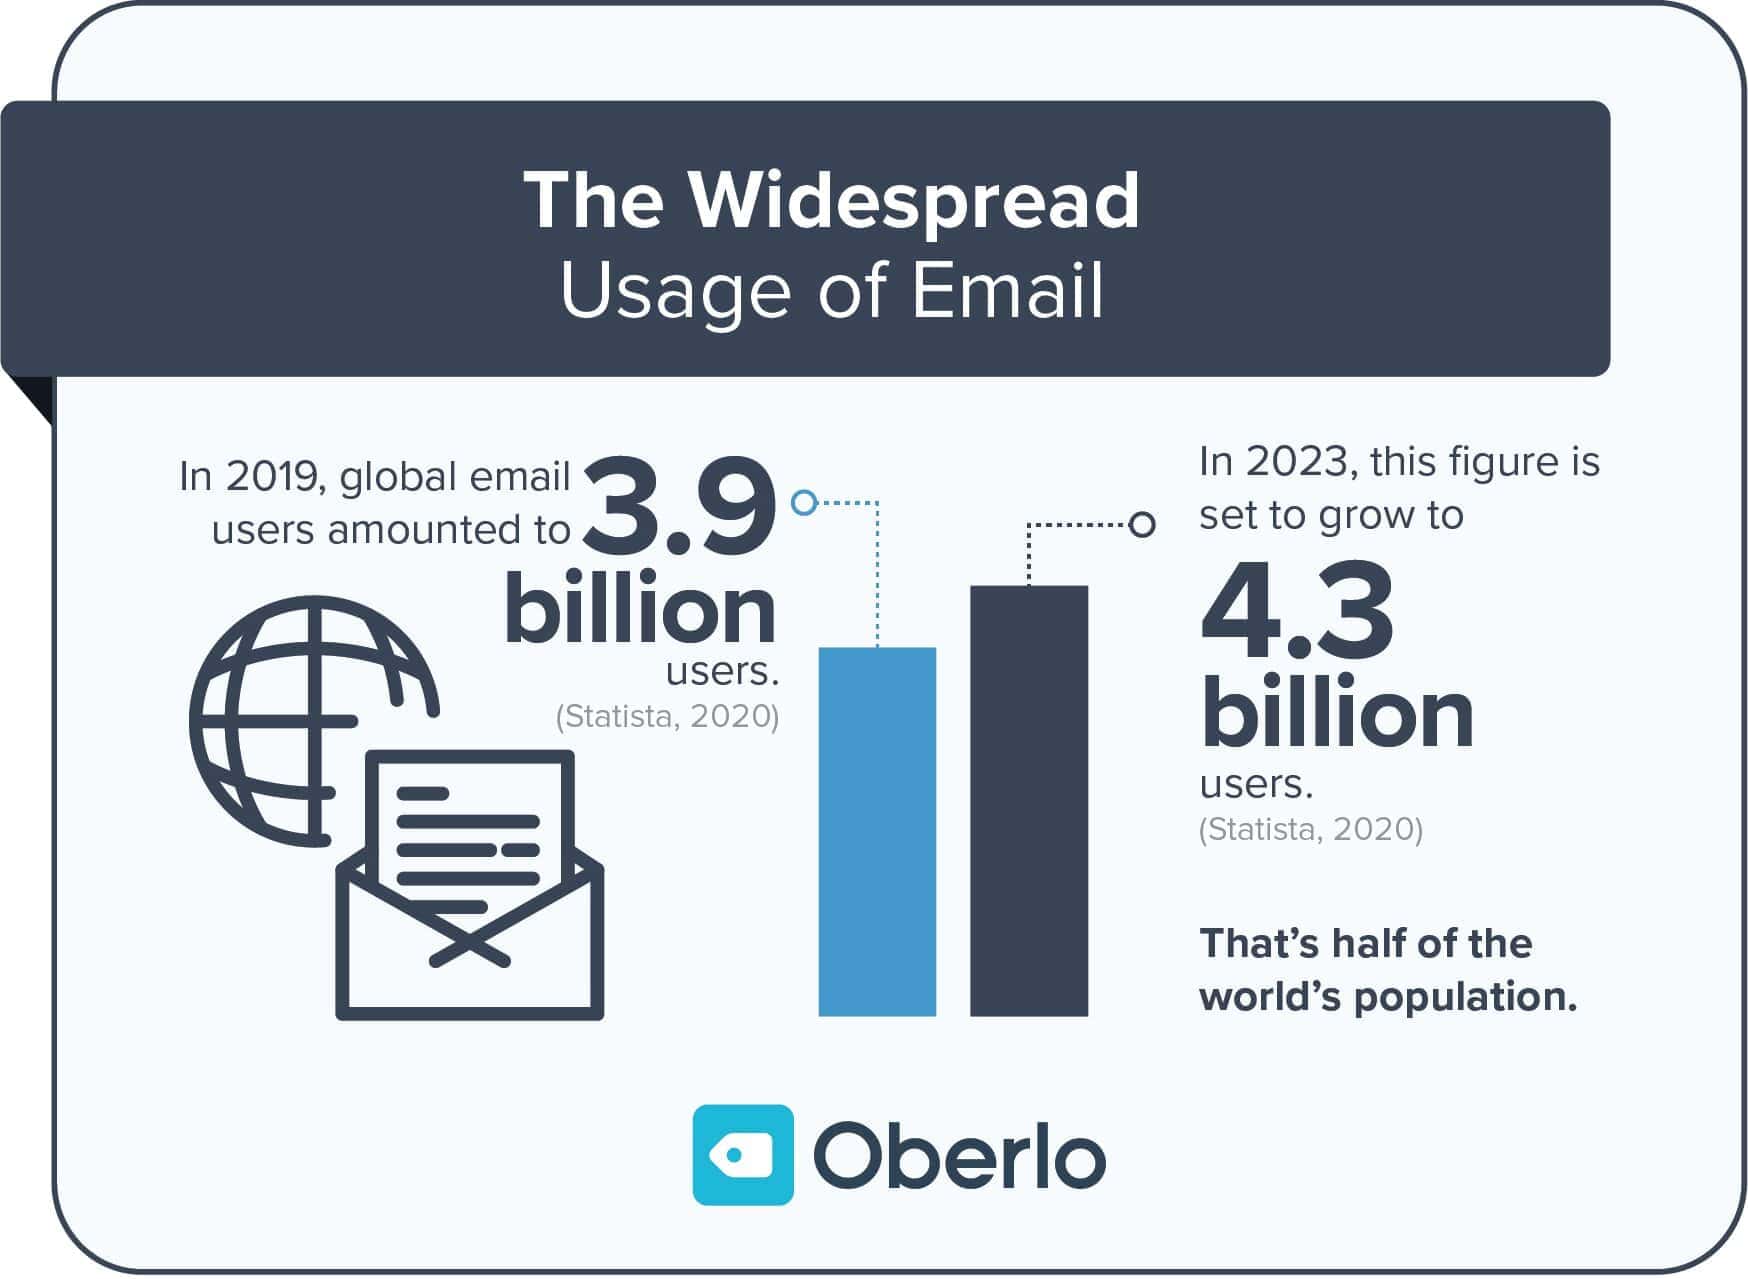 According to Statista, In 2019, there were 3.9 billion email subscribers worldwide